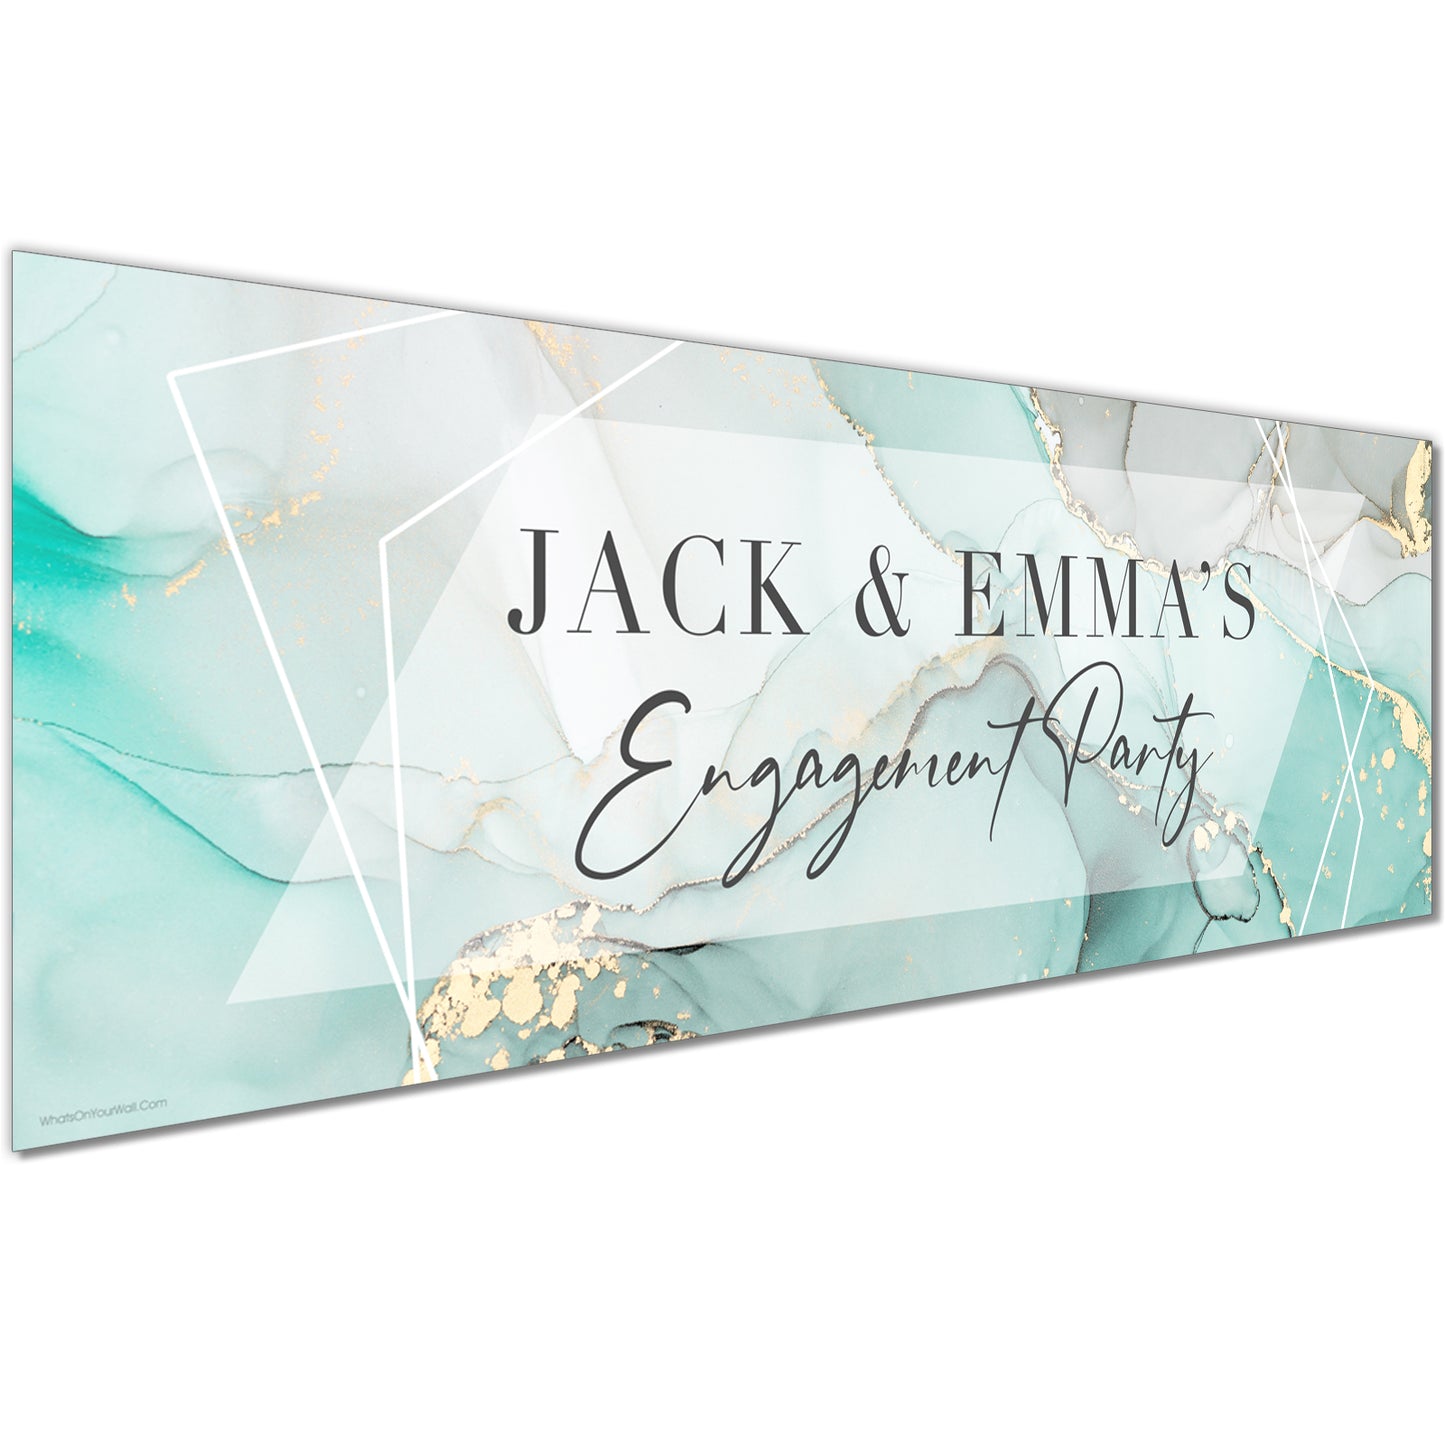 Personalised Engagement Banners in Teal Grey Design